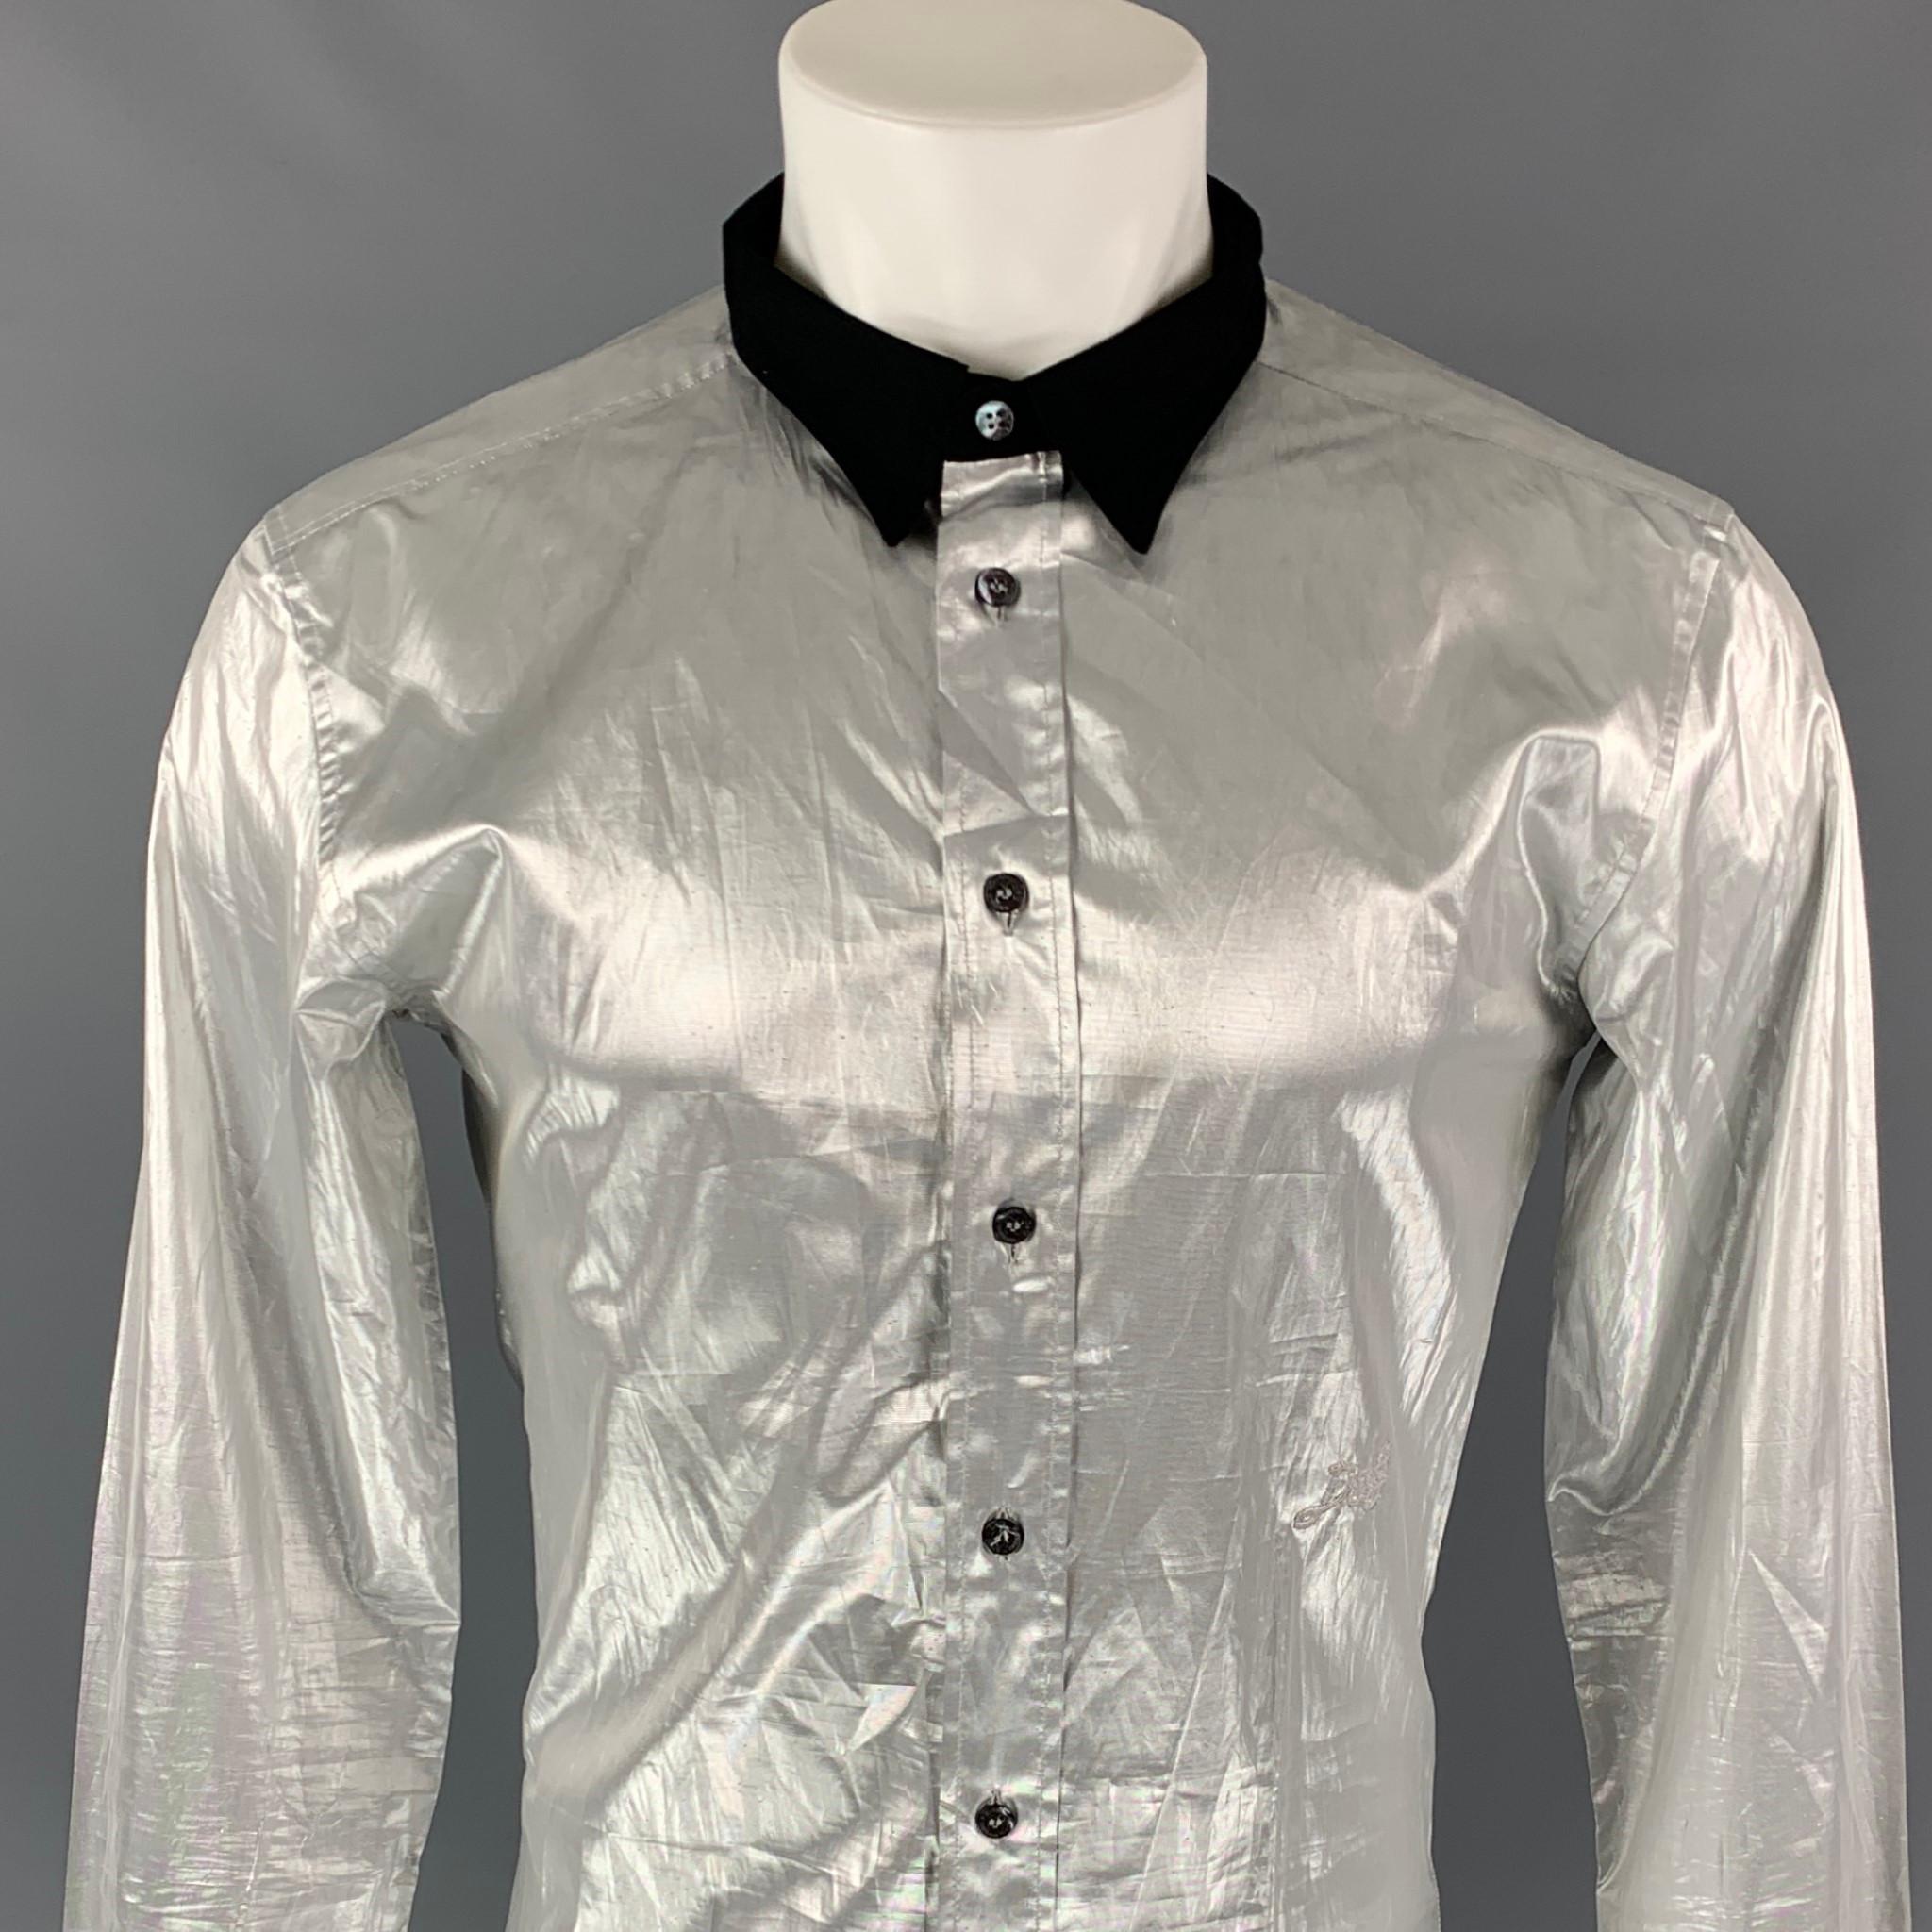 D&G by DOLCE & GABBANA long sleeve shirt comes in a silver metallic material featuring a slim fit, embroidered logo detail, black spread collar, and a button up closure. Made in Italy.

Very Good Pre-Owned Condition. Fabric tag removed.
Marked: Size